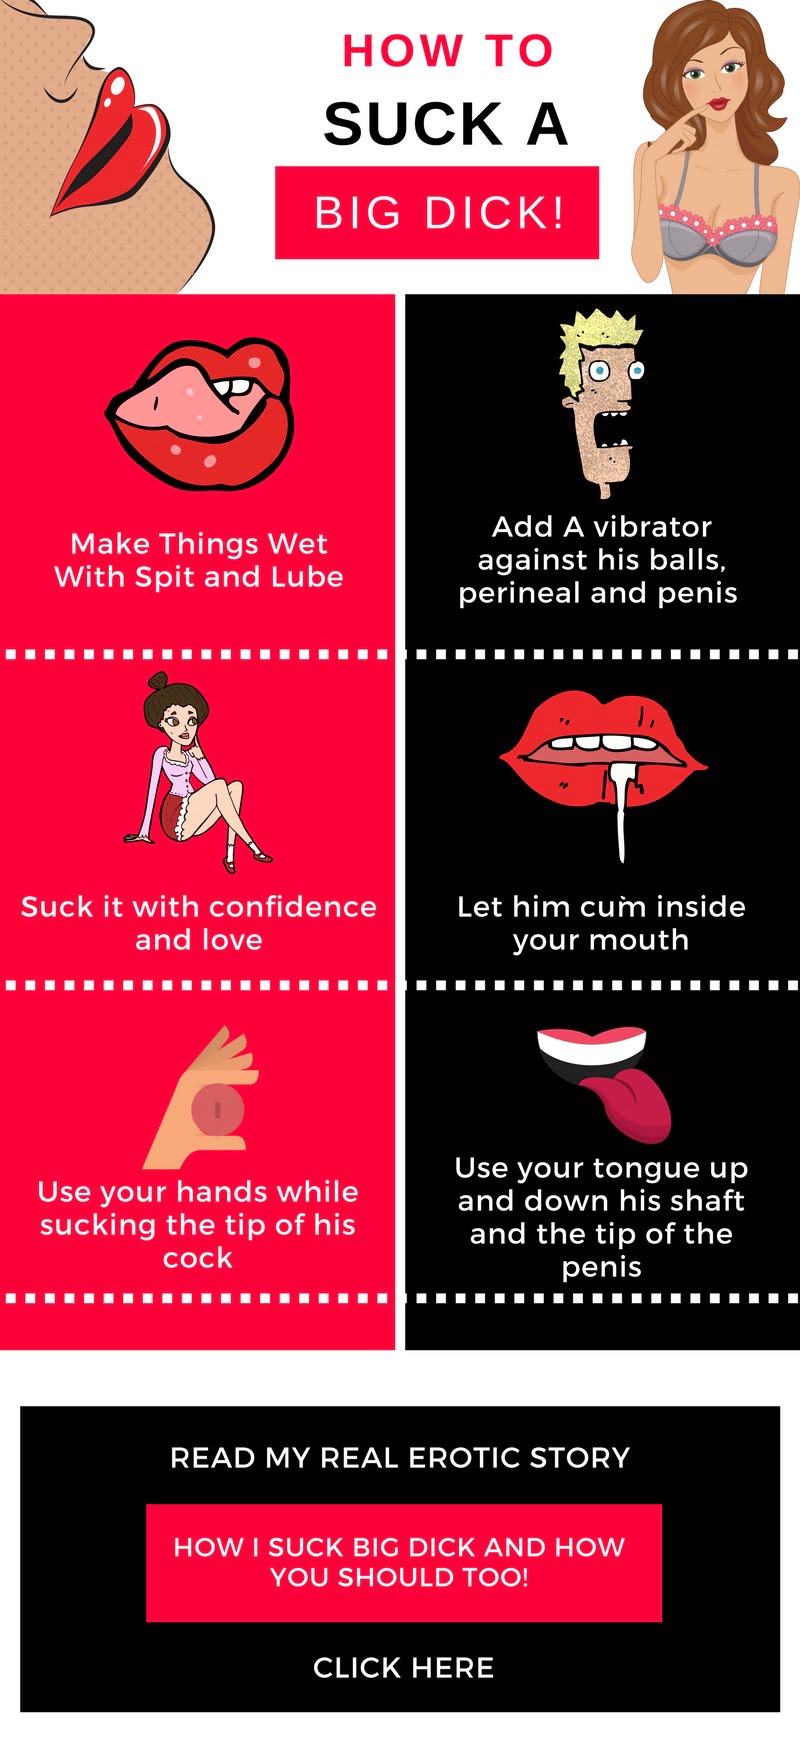 how to suck a big cock infographic